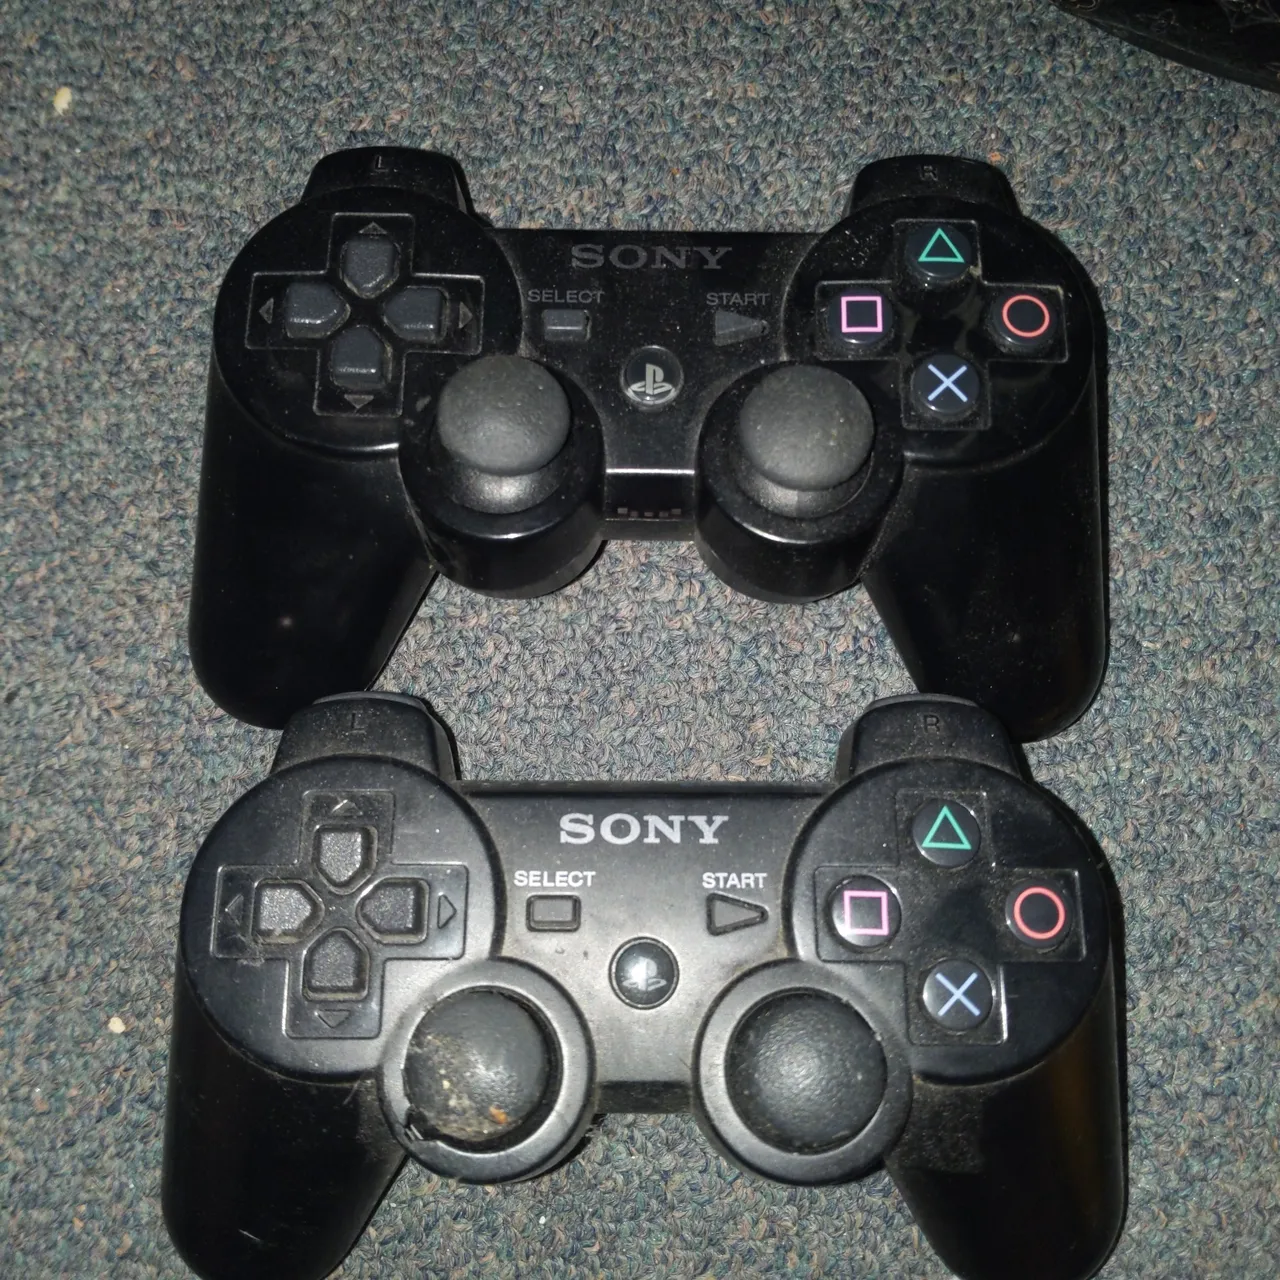 Playstation 3 controllers photo 1